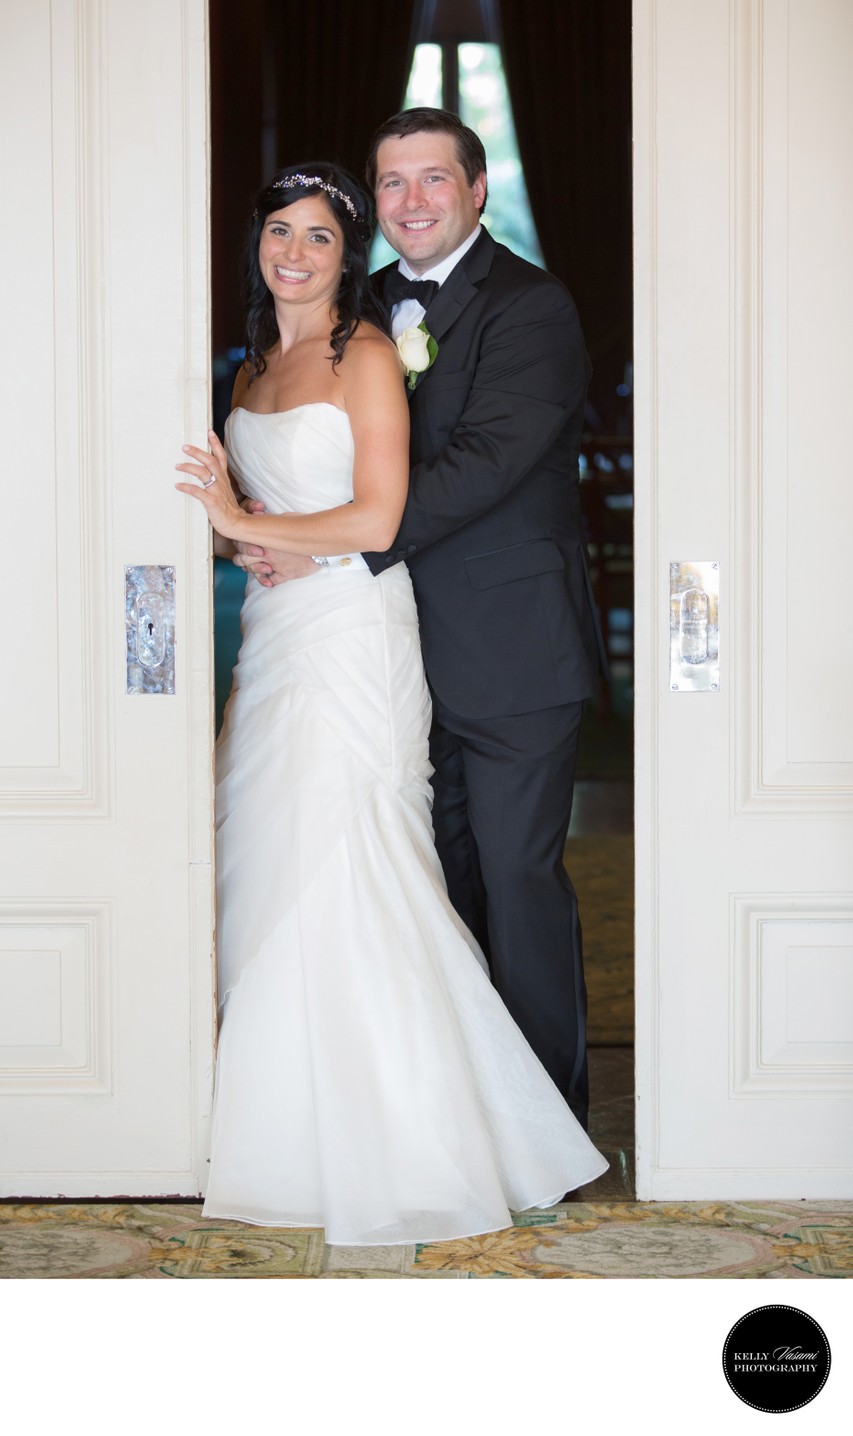 Bride and Groom Portrait at Sleepy Hollow Country Club